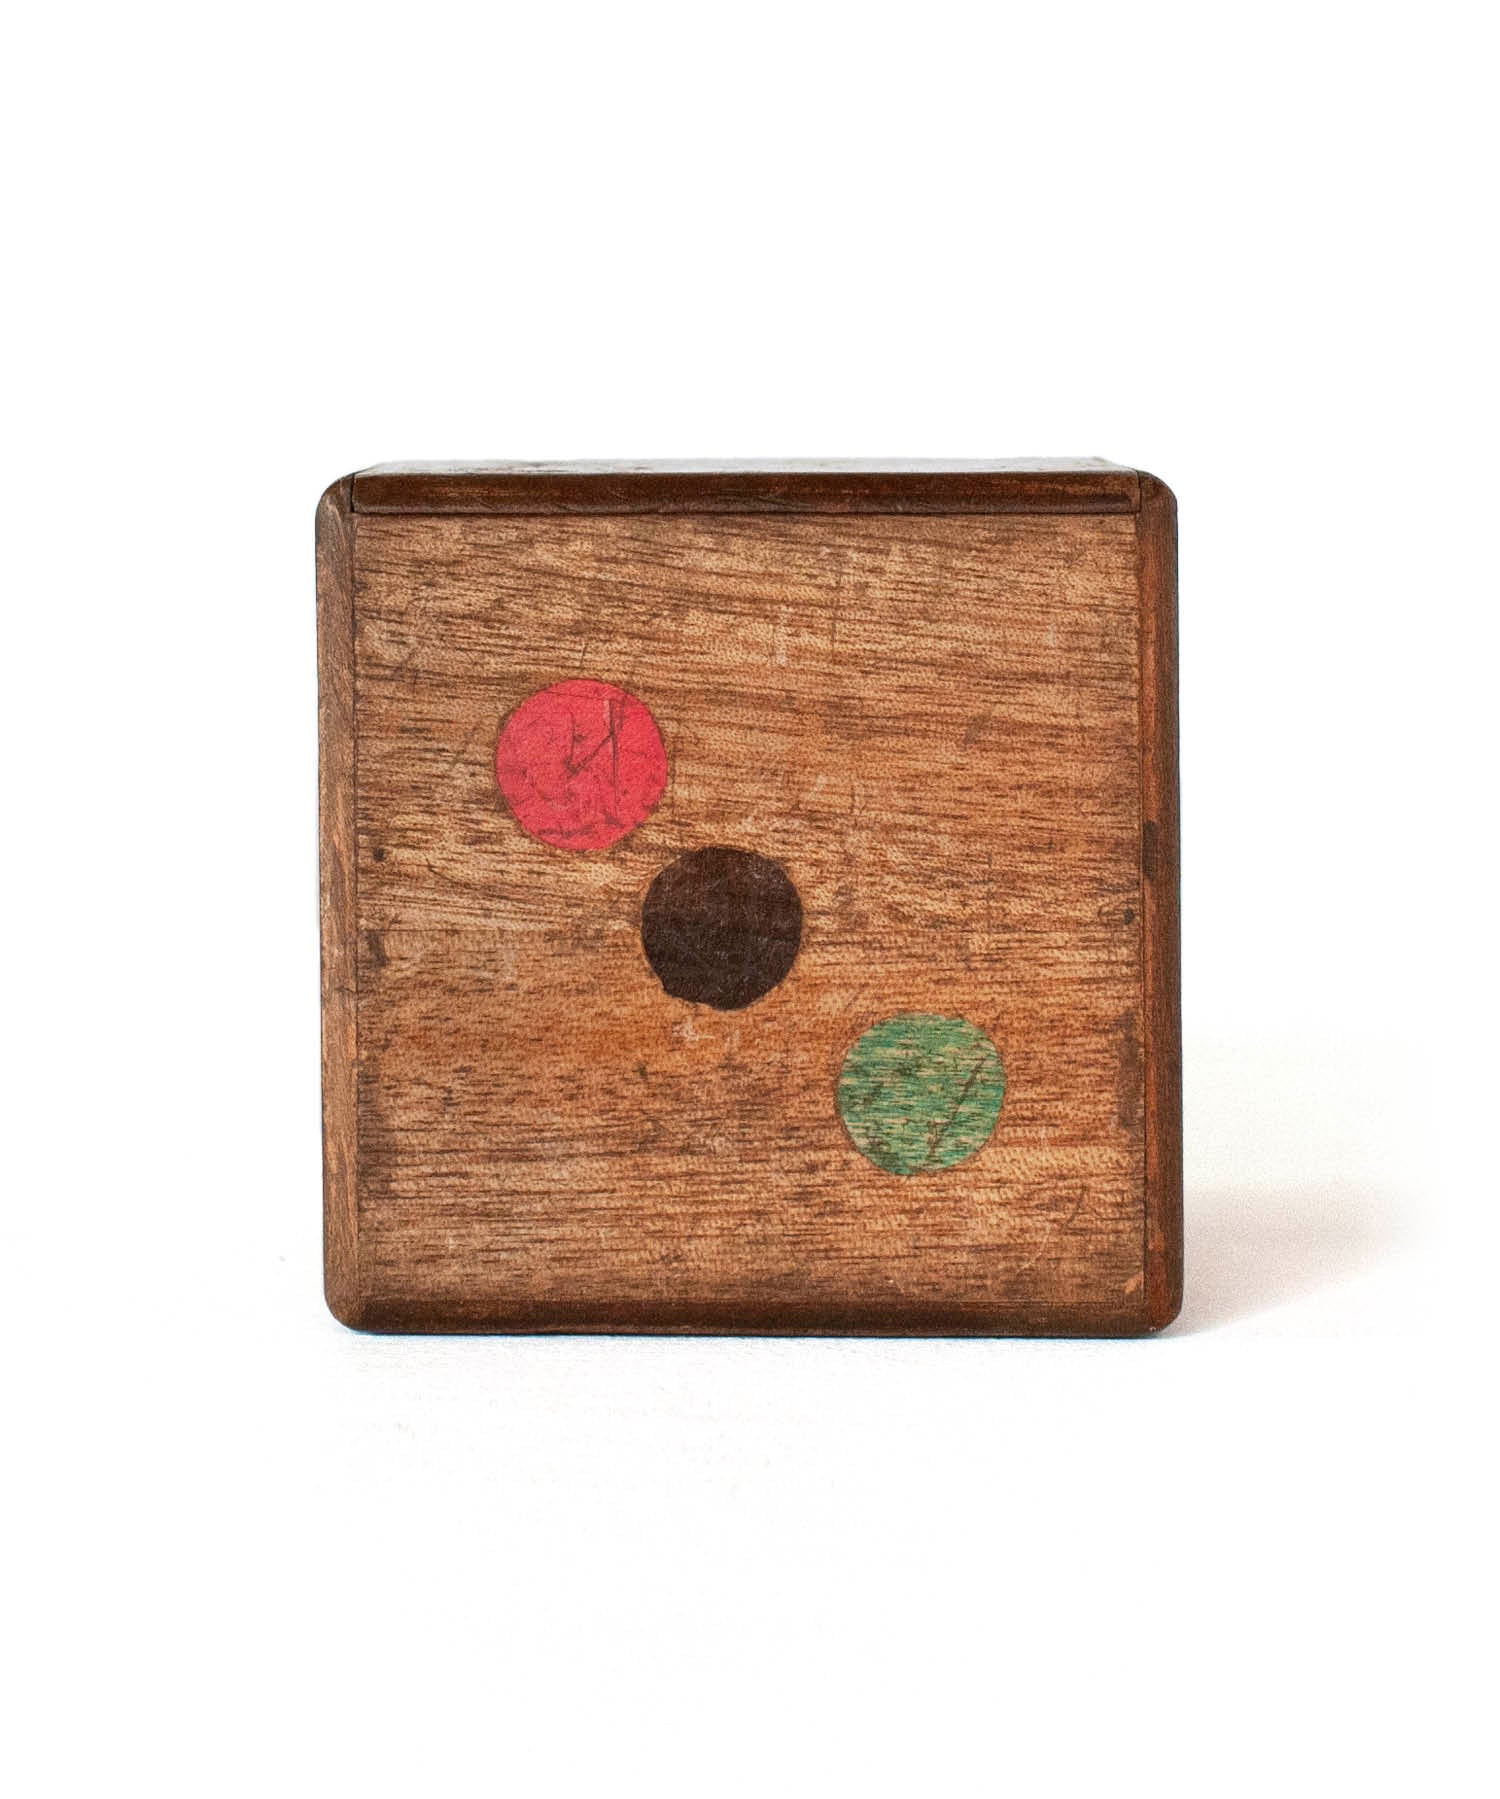 Vintage Object : Wooden Box | LIKE THIS SHOP